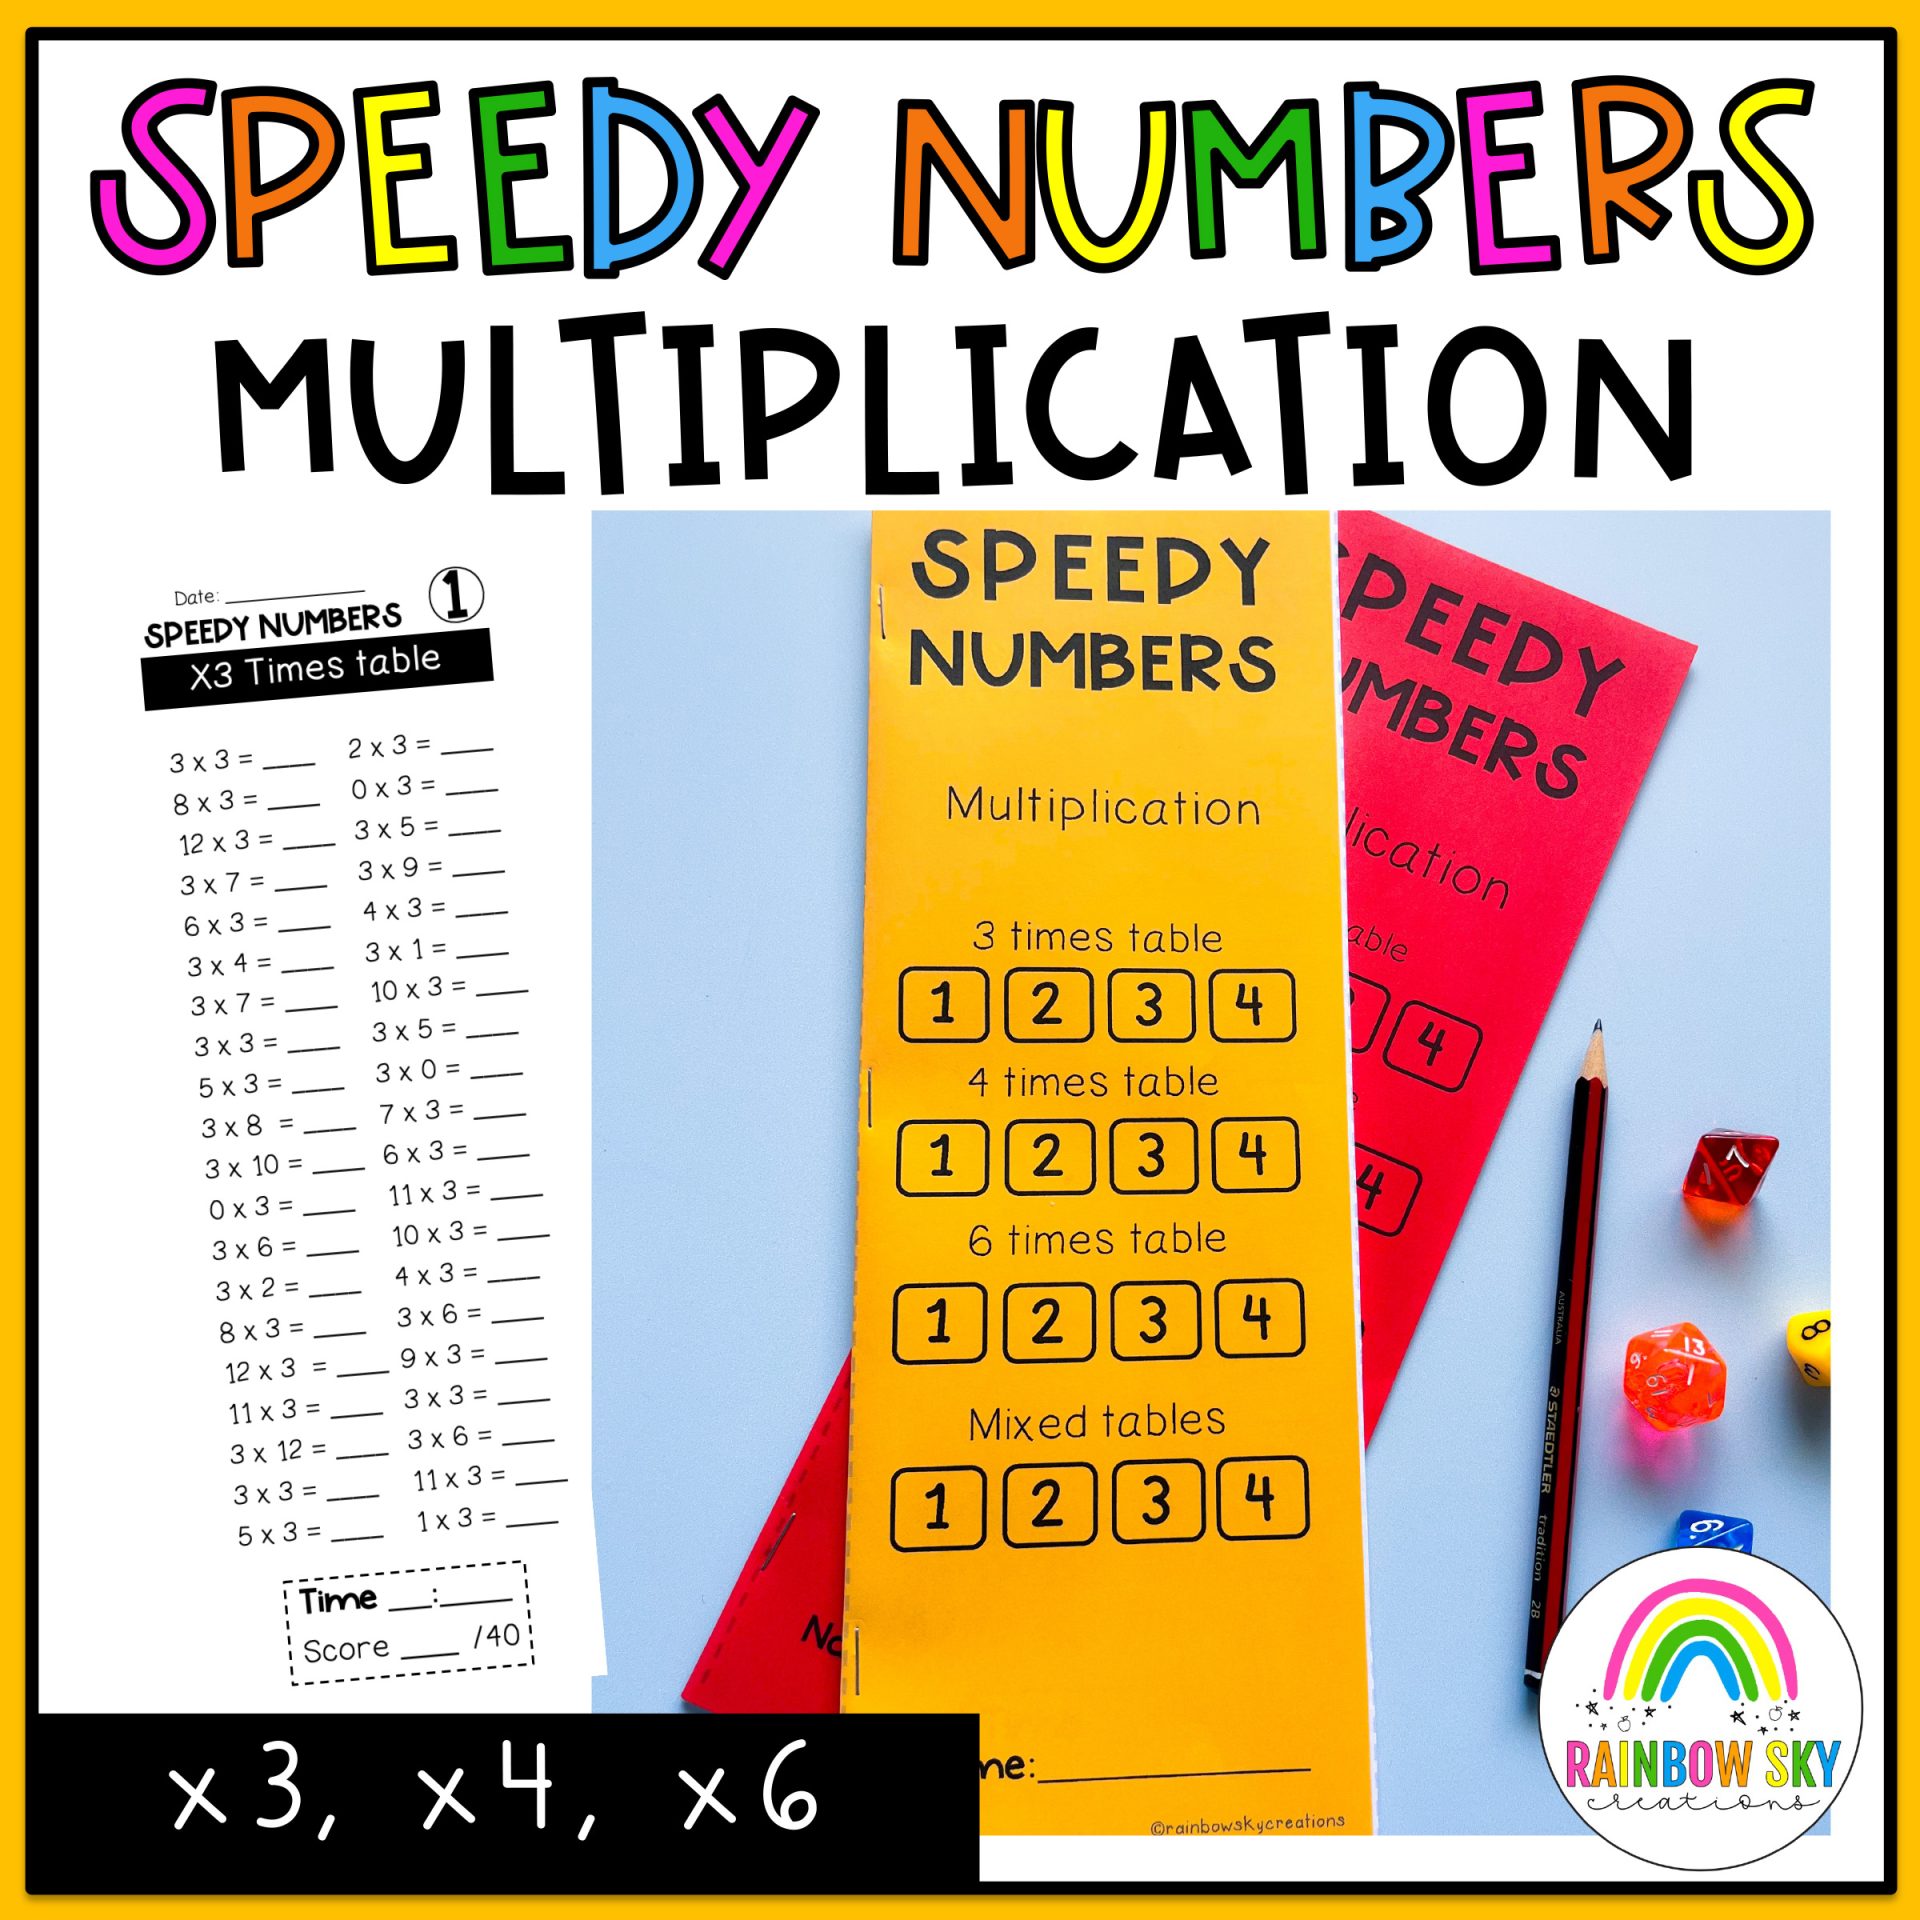 Multiplication Facts Speedy Numbers Booklet | Multiplying by 3, 4, 6